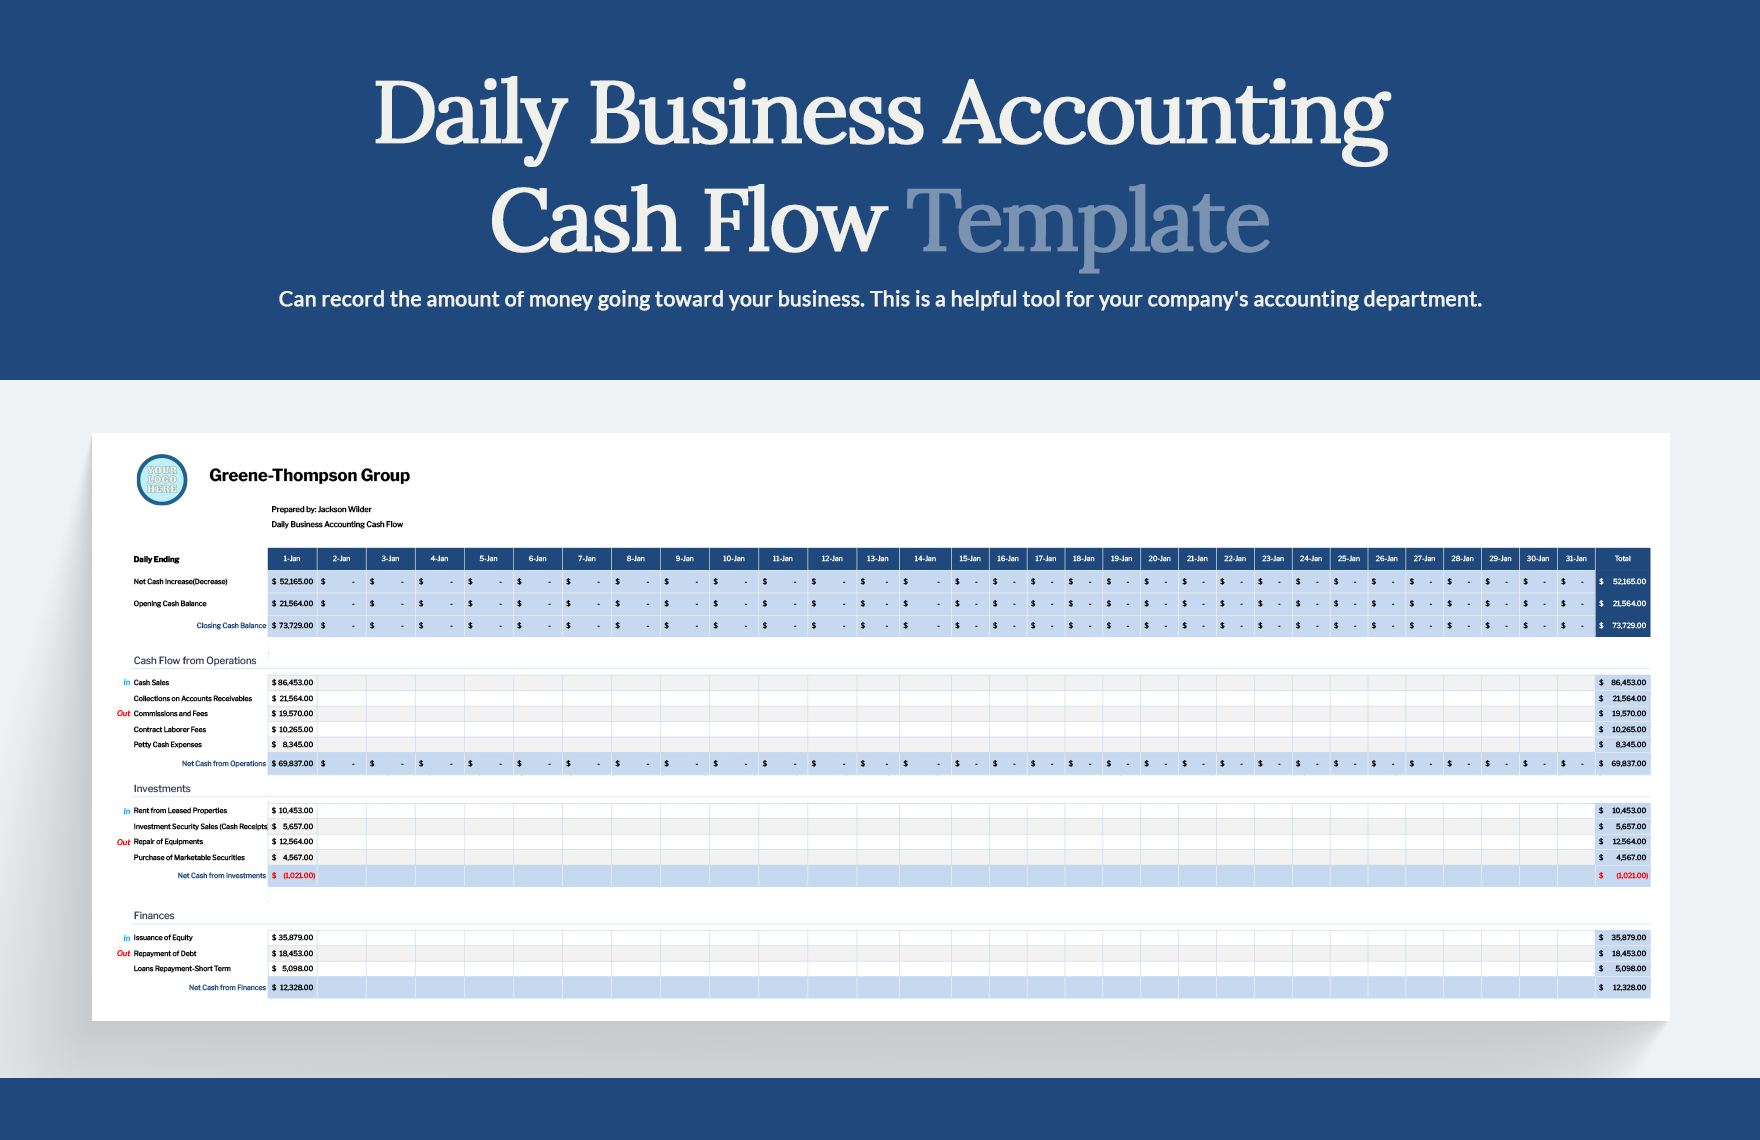 Daily Business Accounting Cash Flow Template